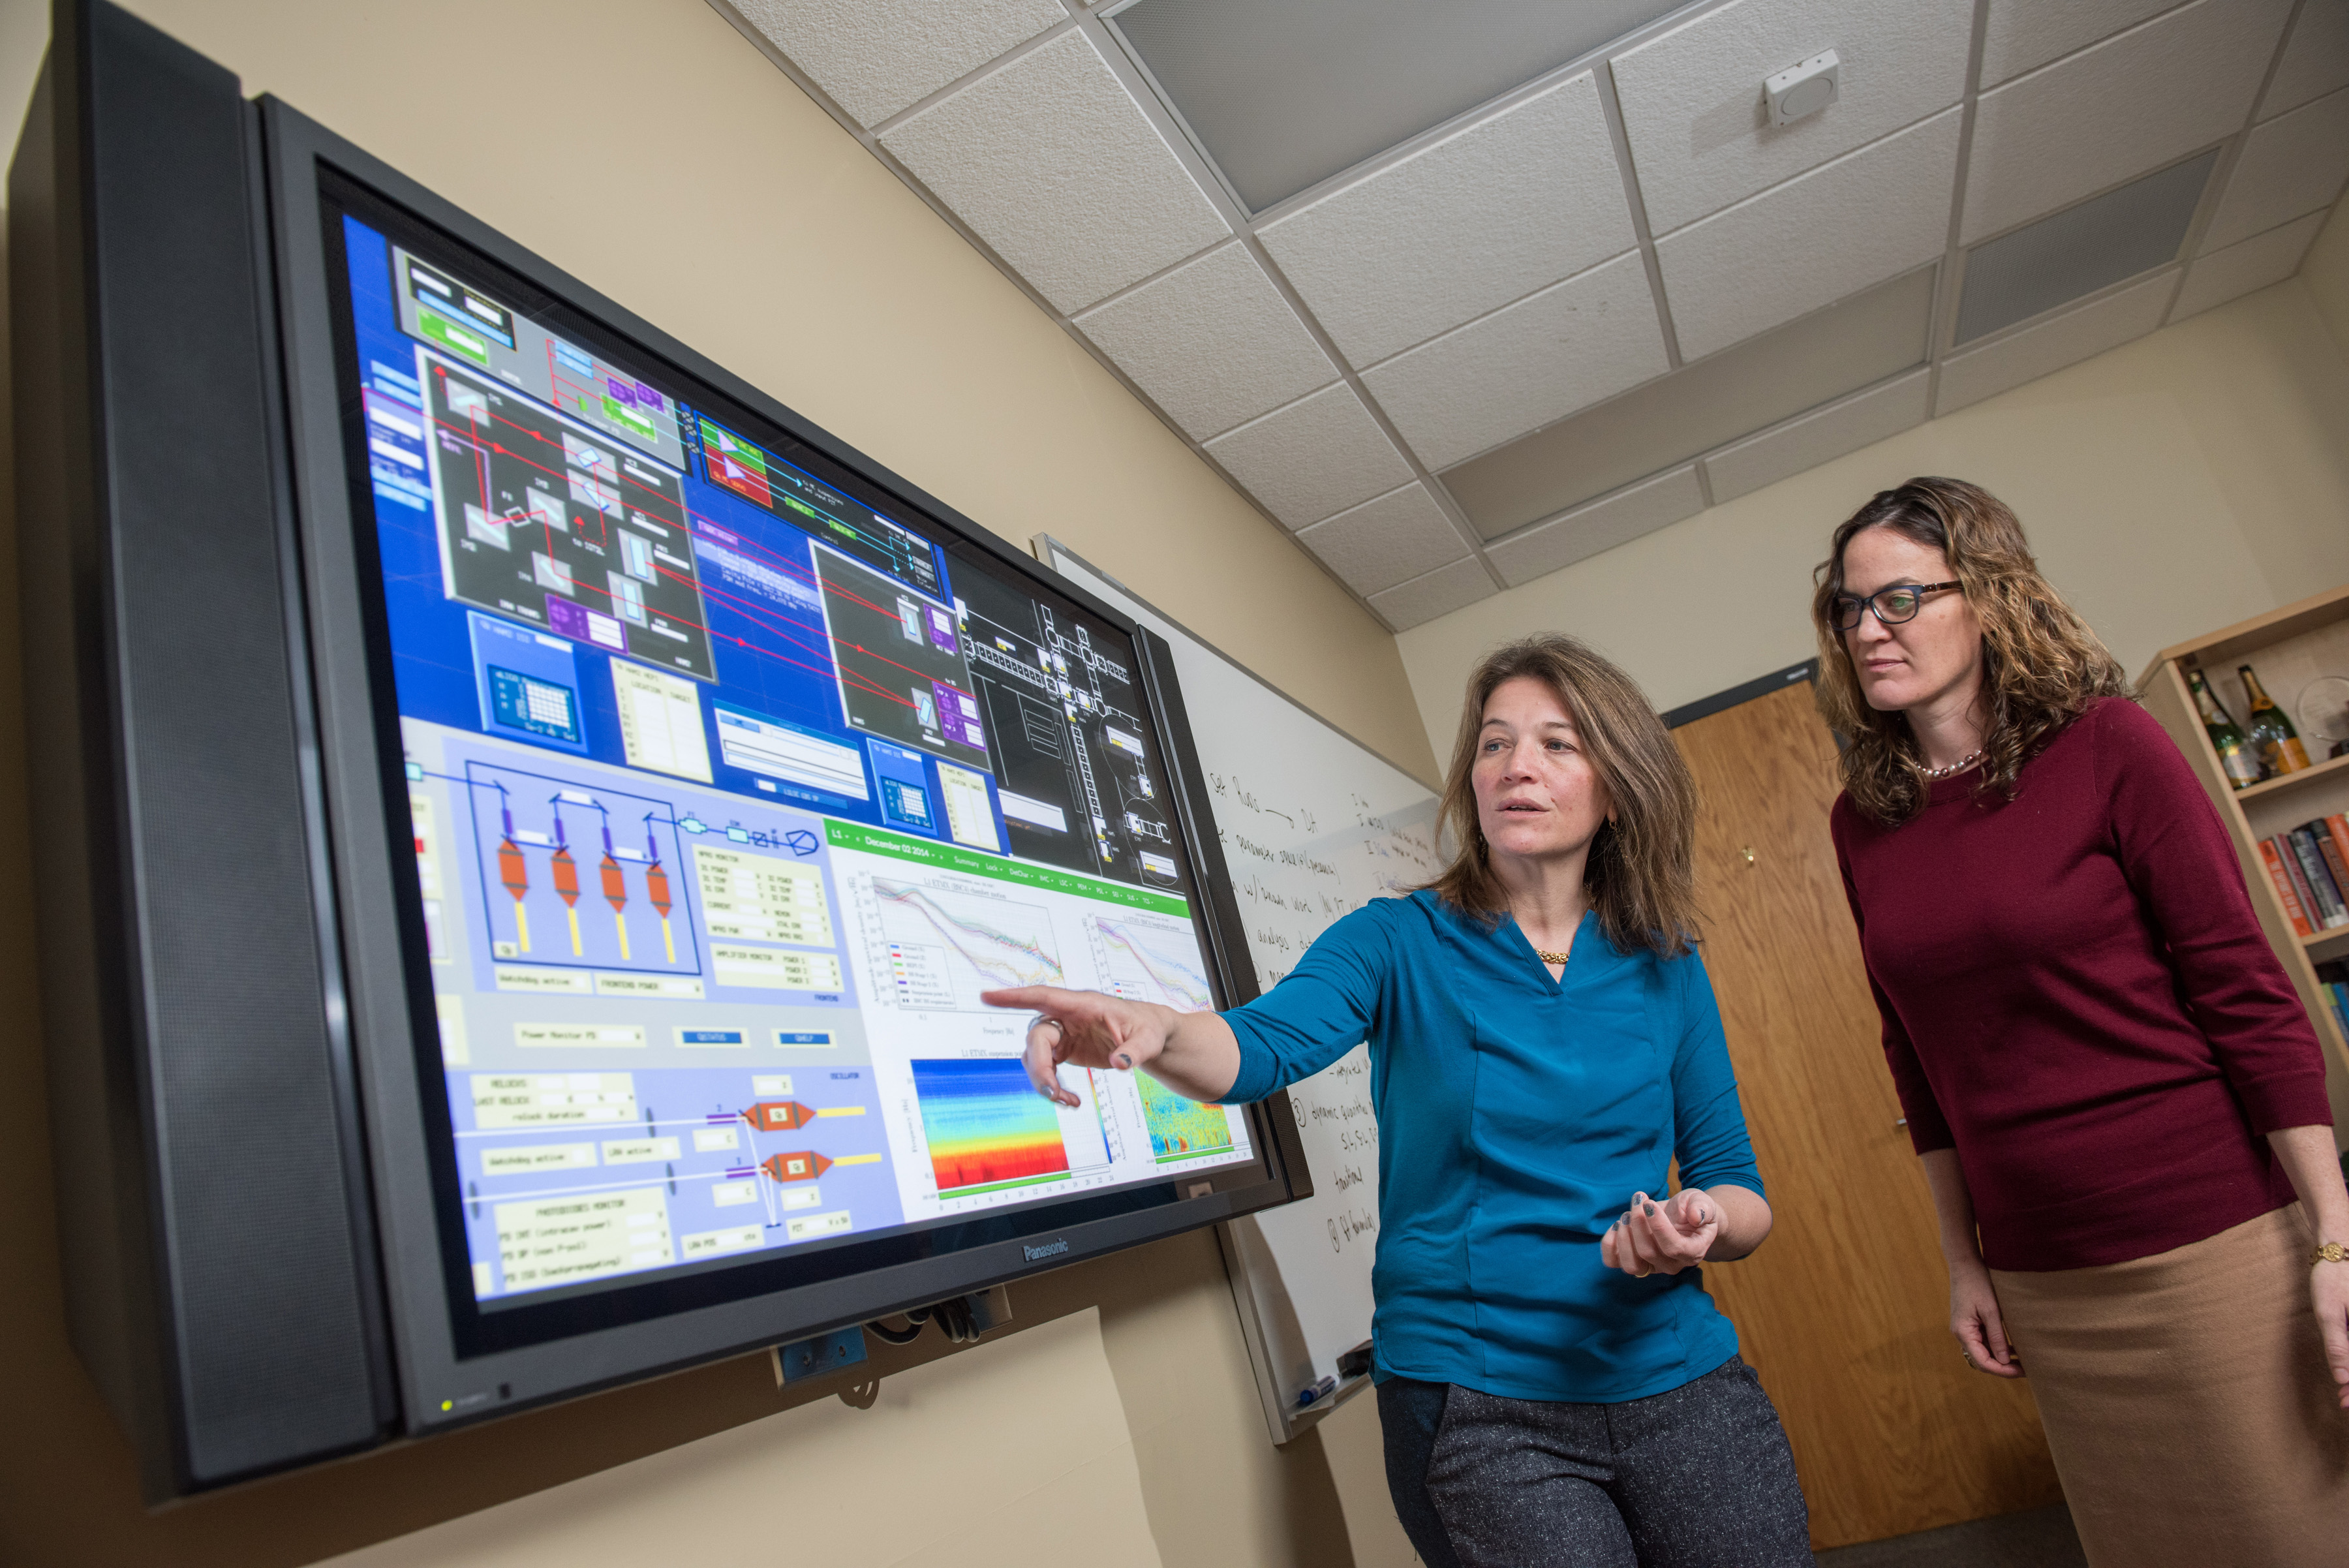 Laura Cadonati (left) and Deirdre Shoemaker discuss data monitoring tools that will be used to display live feeds from LIGO observatories. (Credit: Rob Felt)